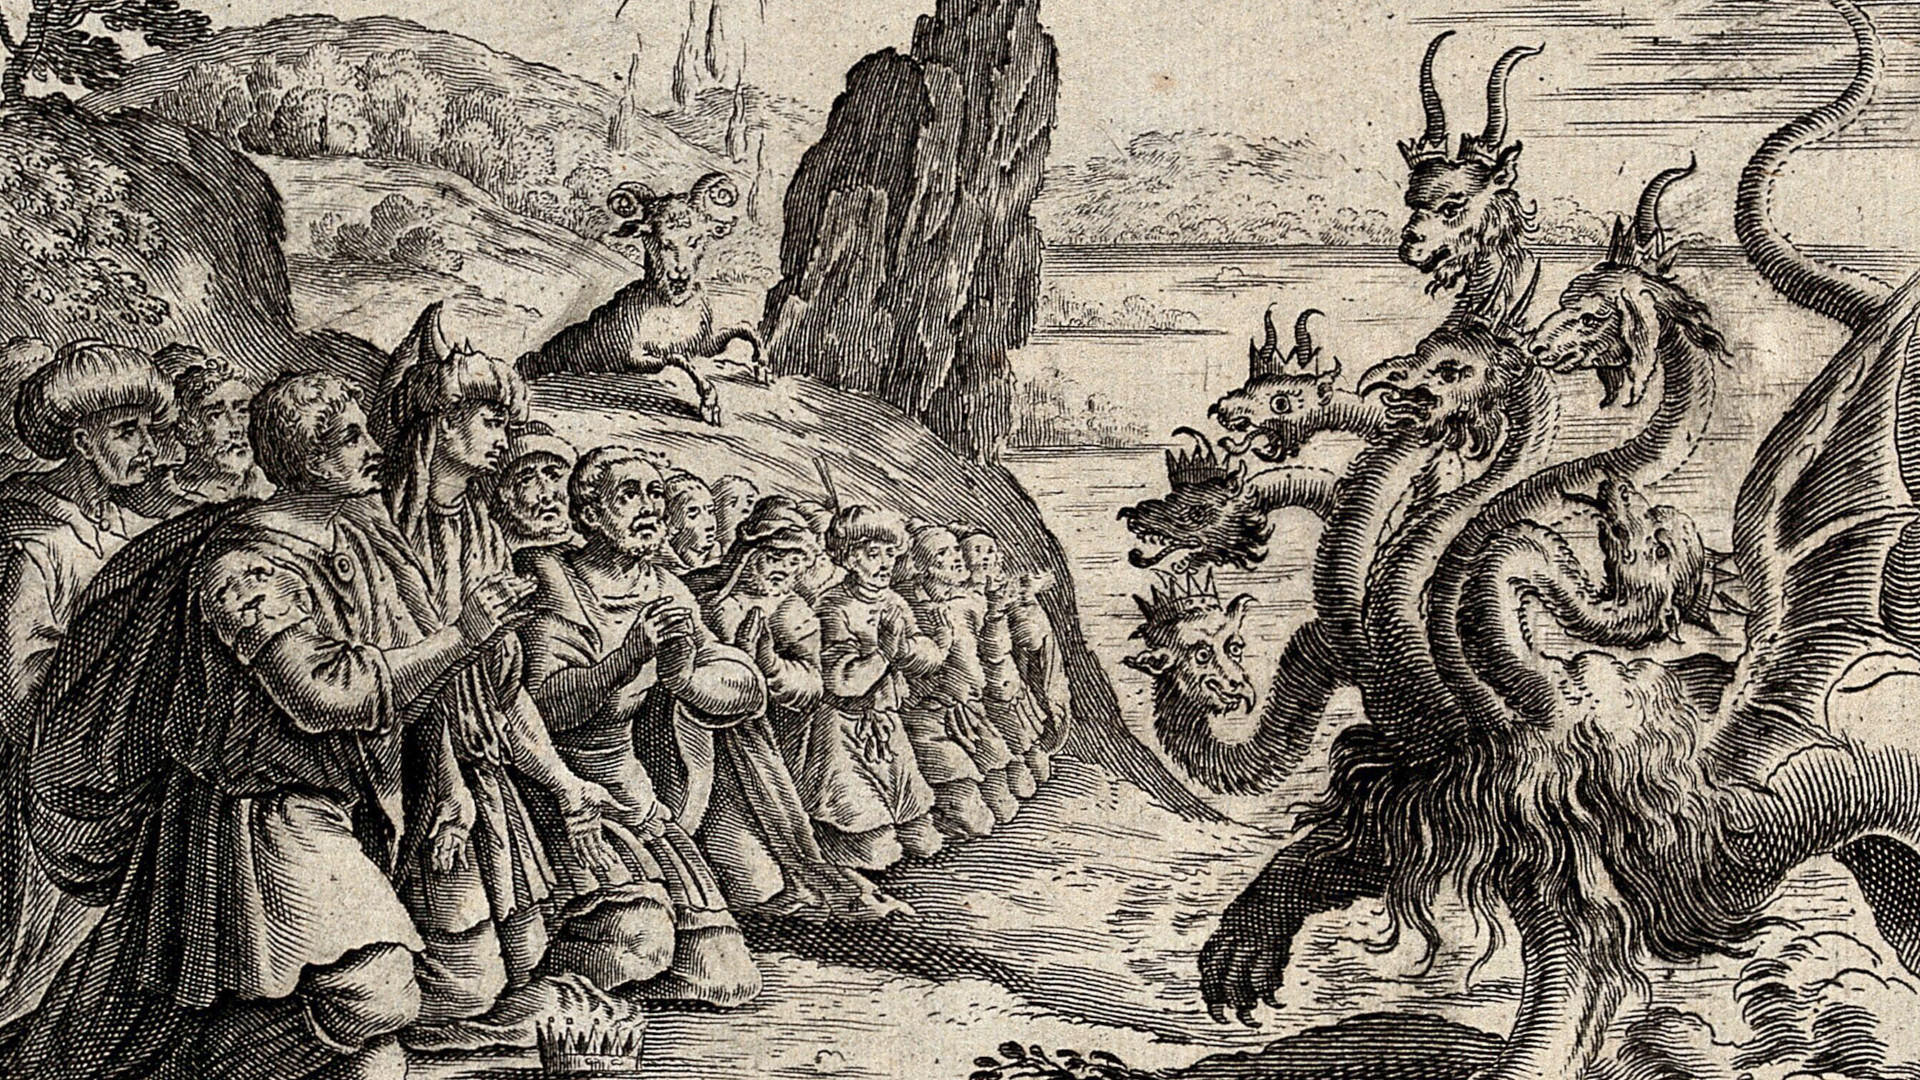 The seven-headed beast is worshipped by men of all nations, as told in the Book of Revelations. Engraving. Wellcome Collection. Public Domain Mark.